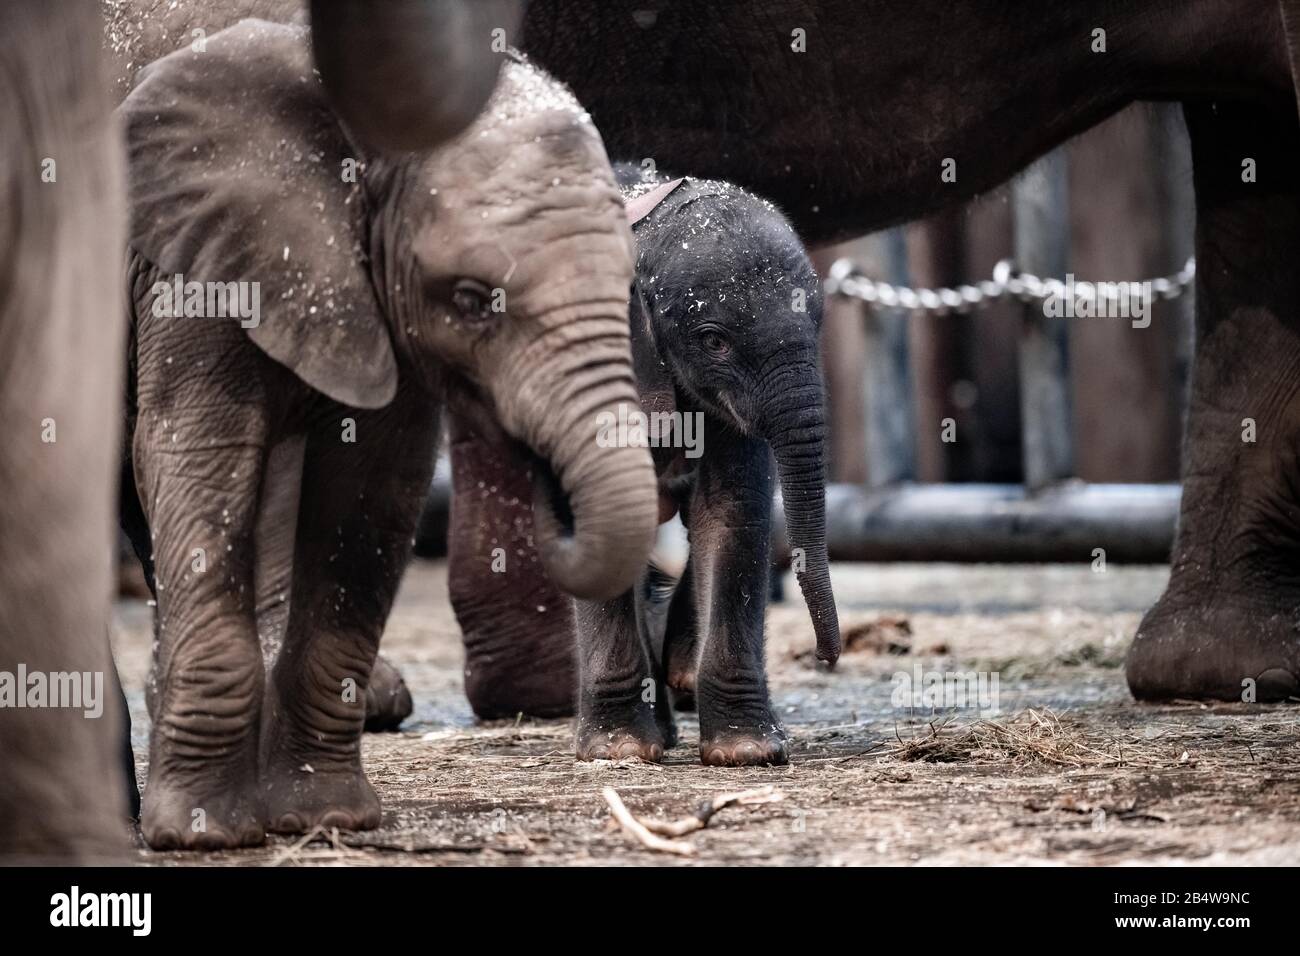 07 March 2020, North Rhine-Westphalia, Wuppertal: Elephant boy 'Tsavo' is in the enclosure at the zoo. A baby elephant was born at the Wuppertal Zoo on Friday. Elephant cow 'Sweni' gave birth to the healthy male calf. The elephant boy is called 'Tsavo'. The elephant house was closed on Friday, but from Saturday on the young animal is on public view. Photo: Fabian Strauch/epa Scanpix Sweden/dpa Stock Photo